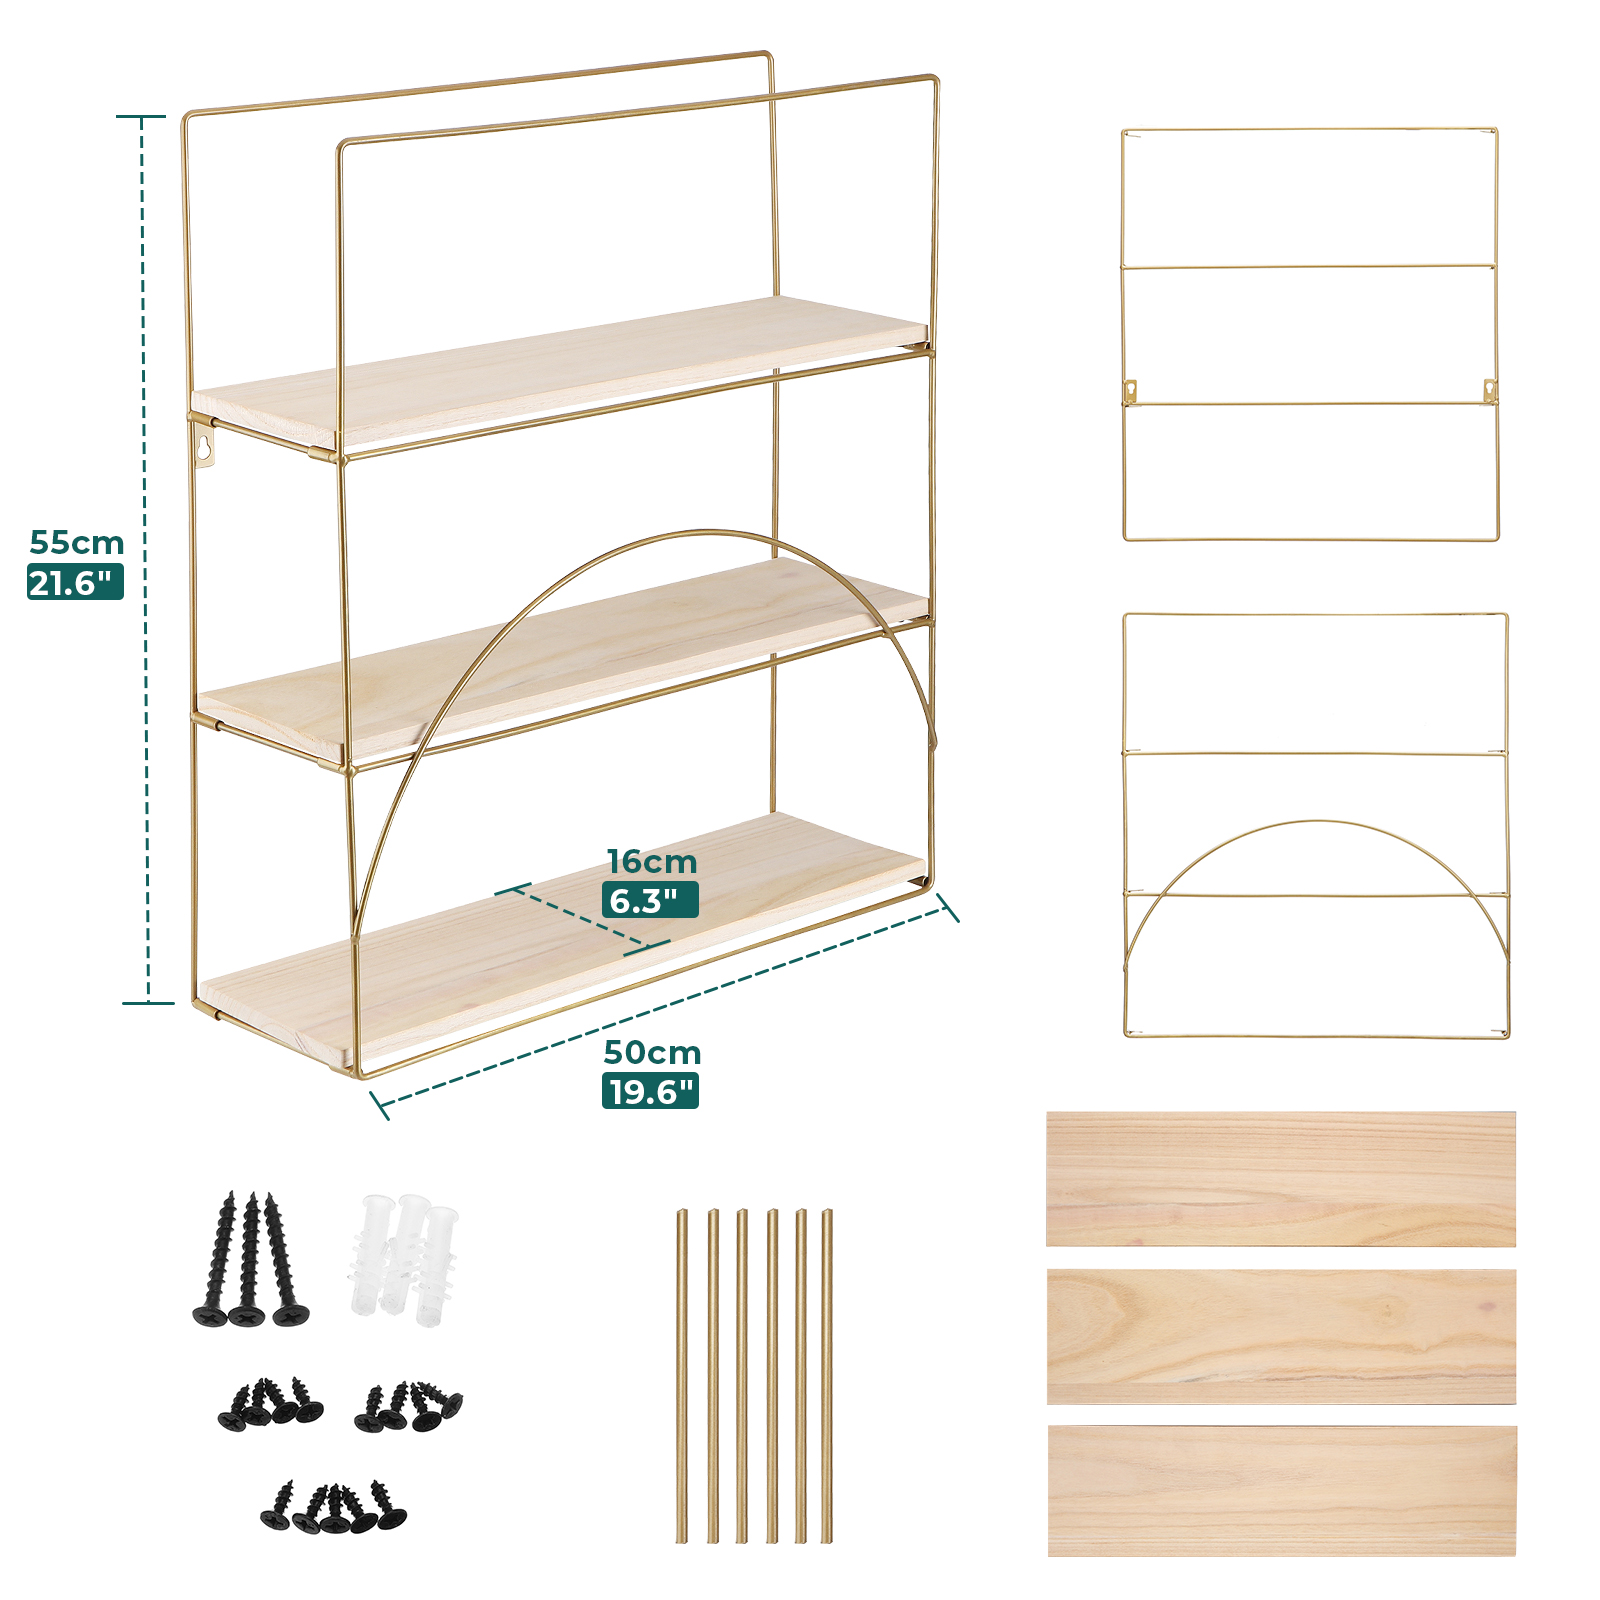 AGSIVO-3-Layer-Wooden-Wall-Mounted-Storage-Shelves-Bedroom-Drawing-Room-Rack-Shelf-Organizer-Holder-1822240-9